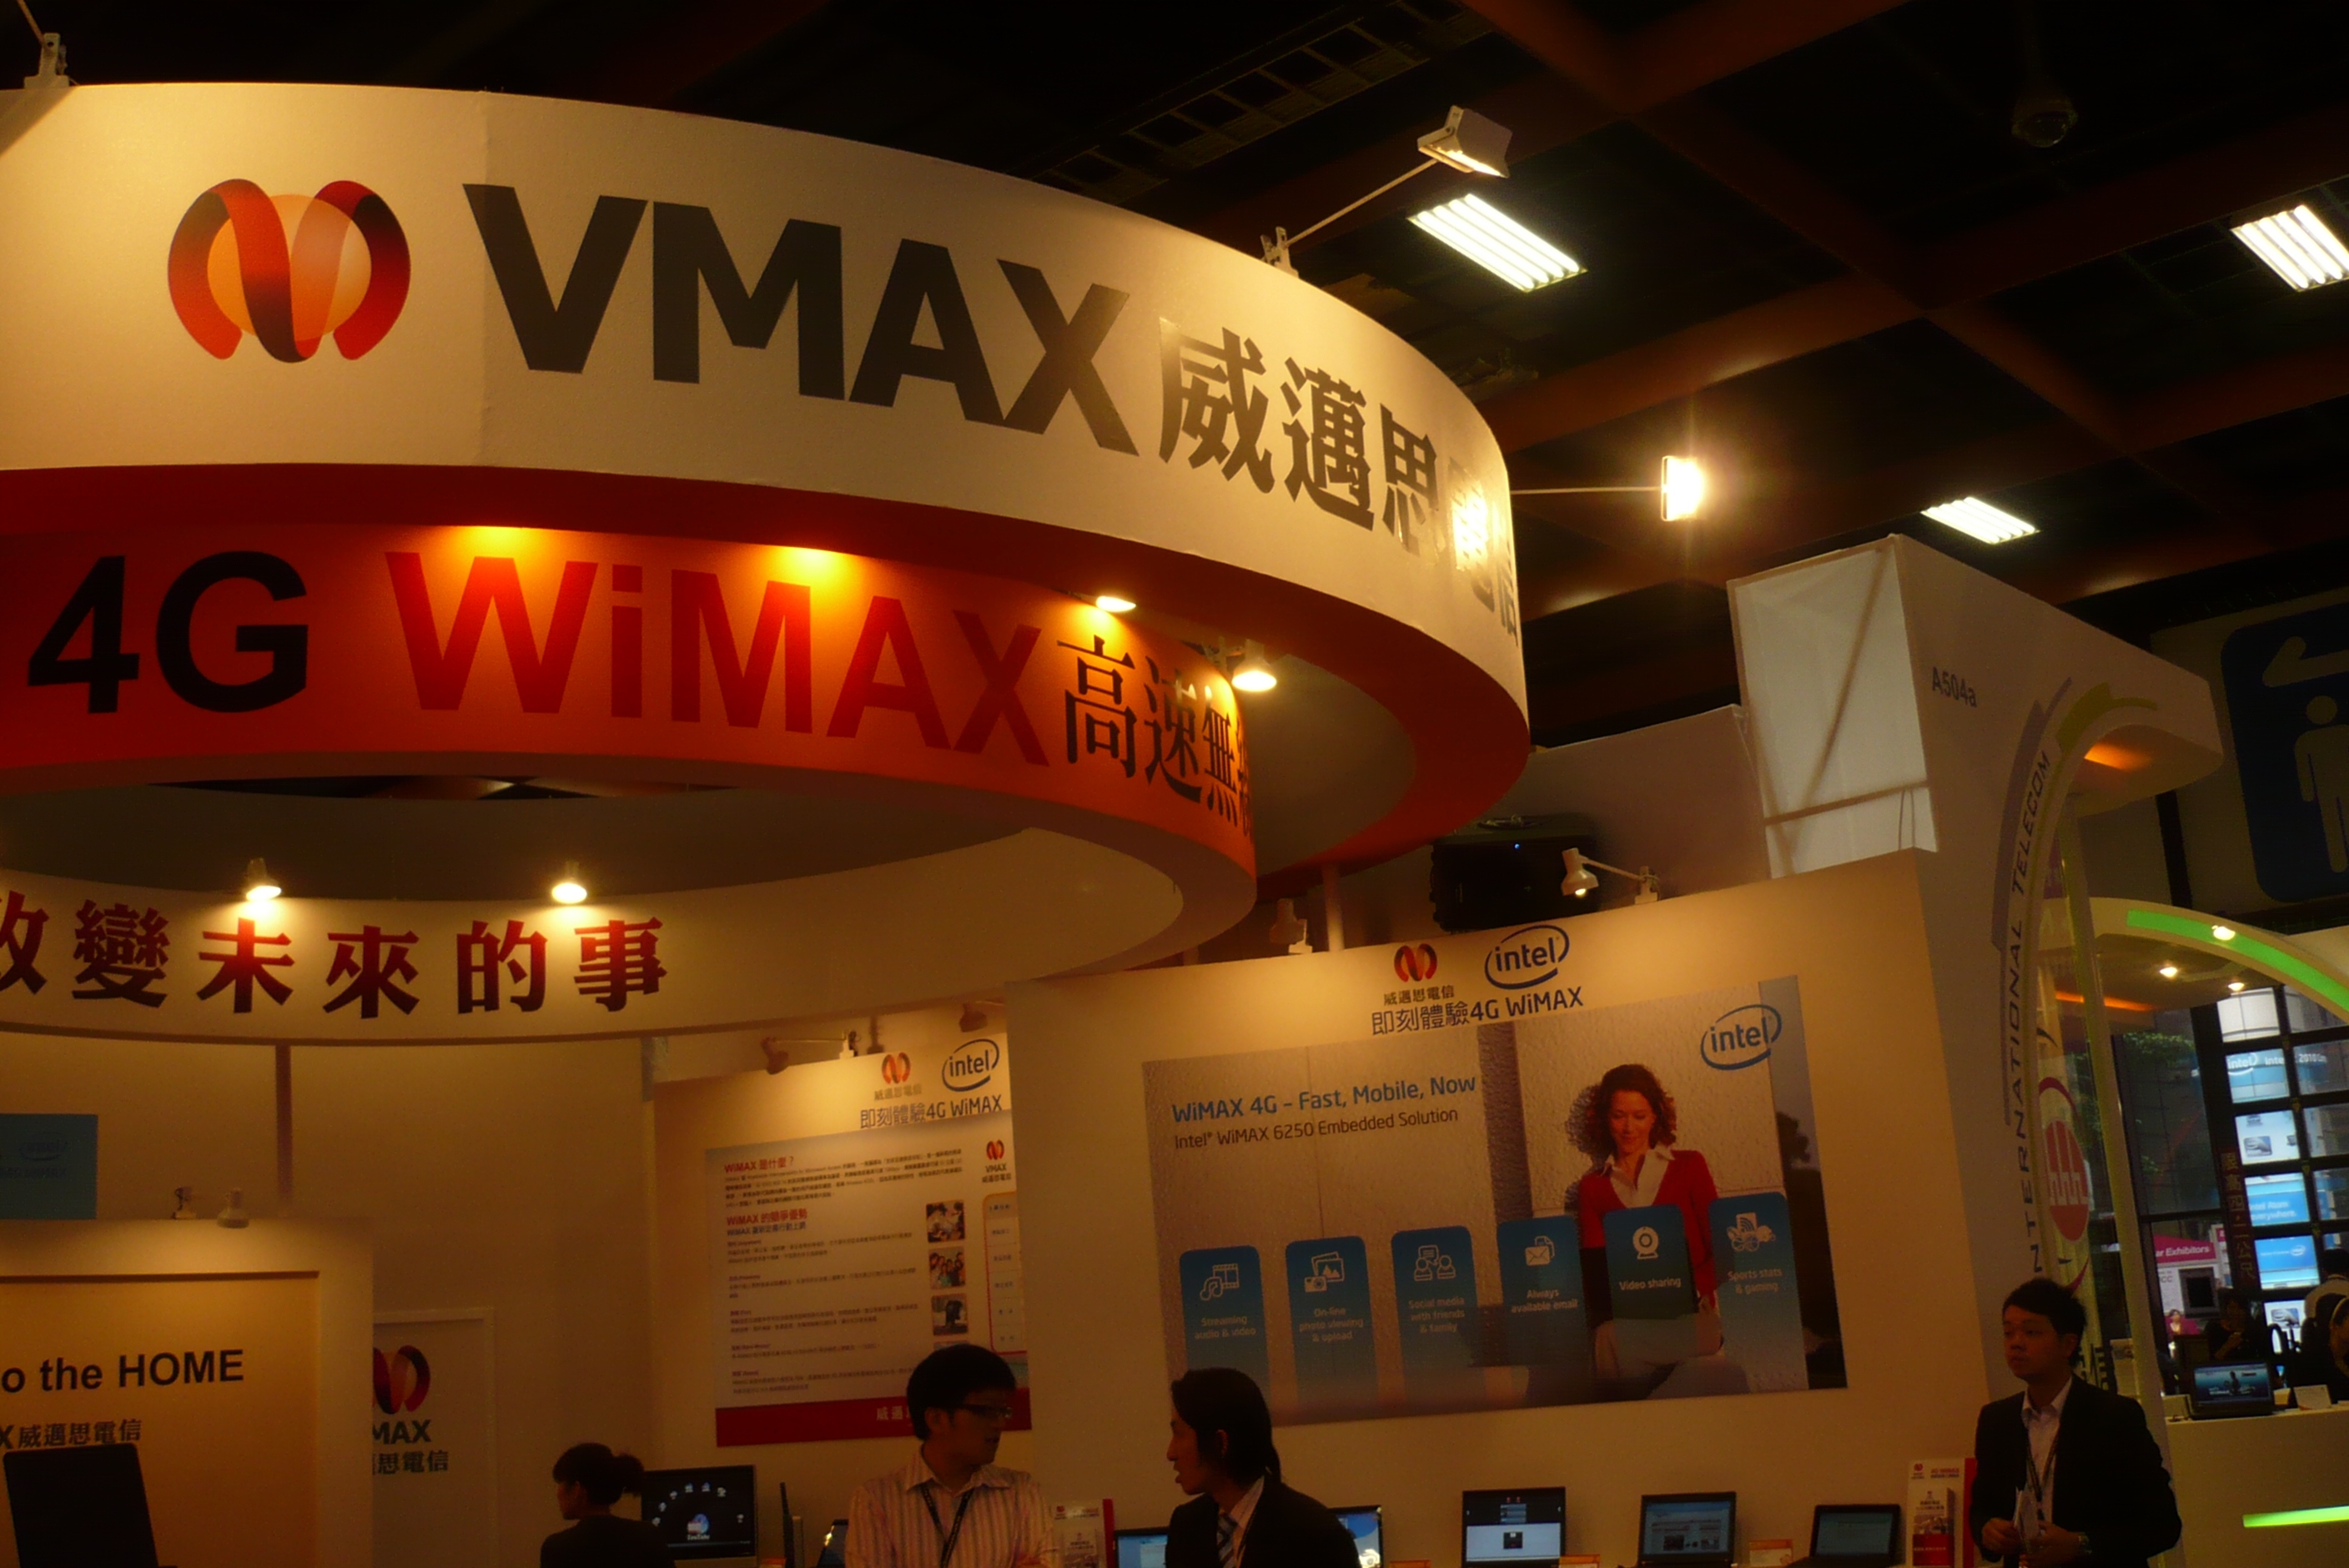 VAMX connects 3,000 taxis in Taipei via its WiMAX network.